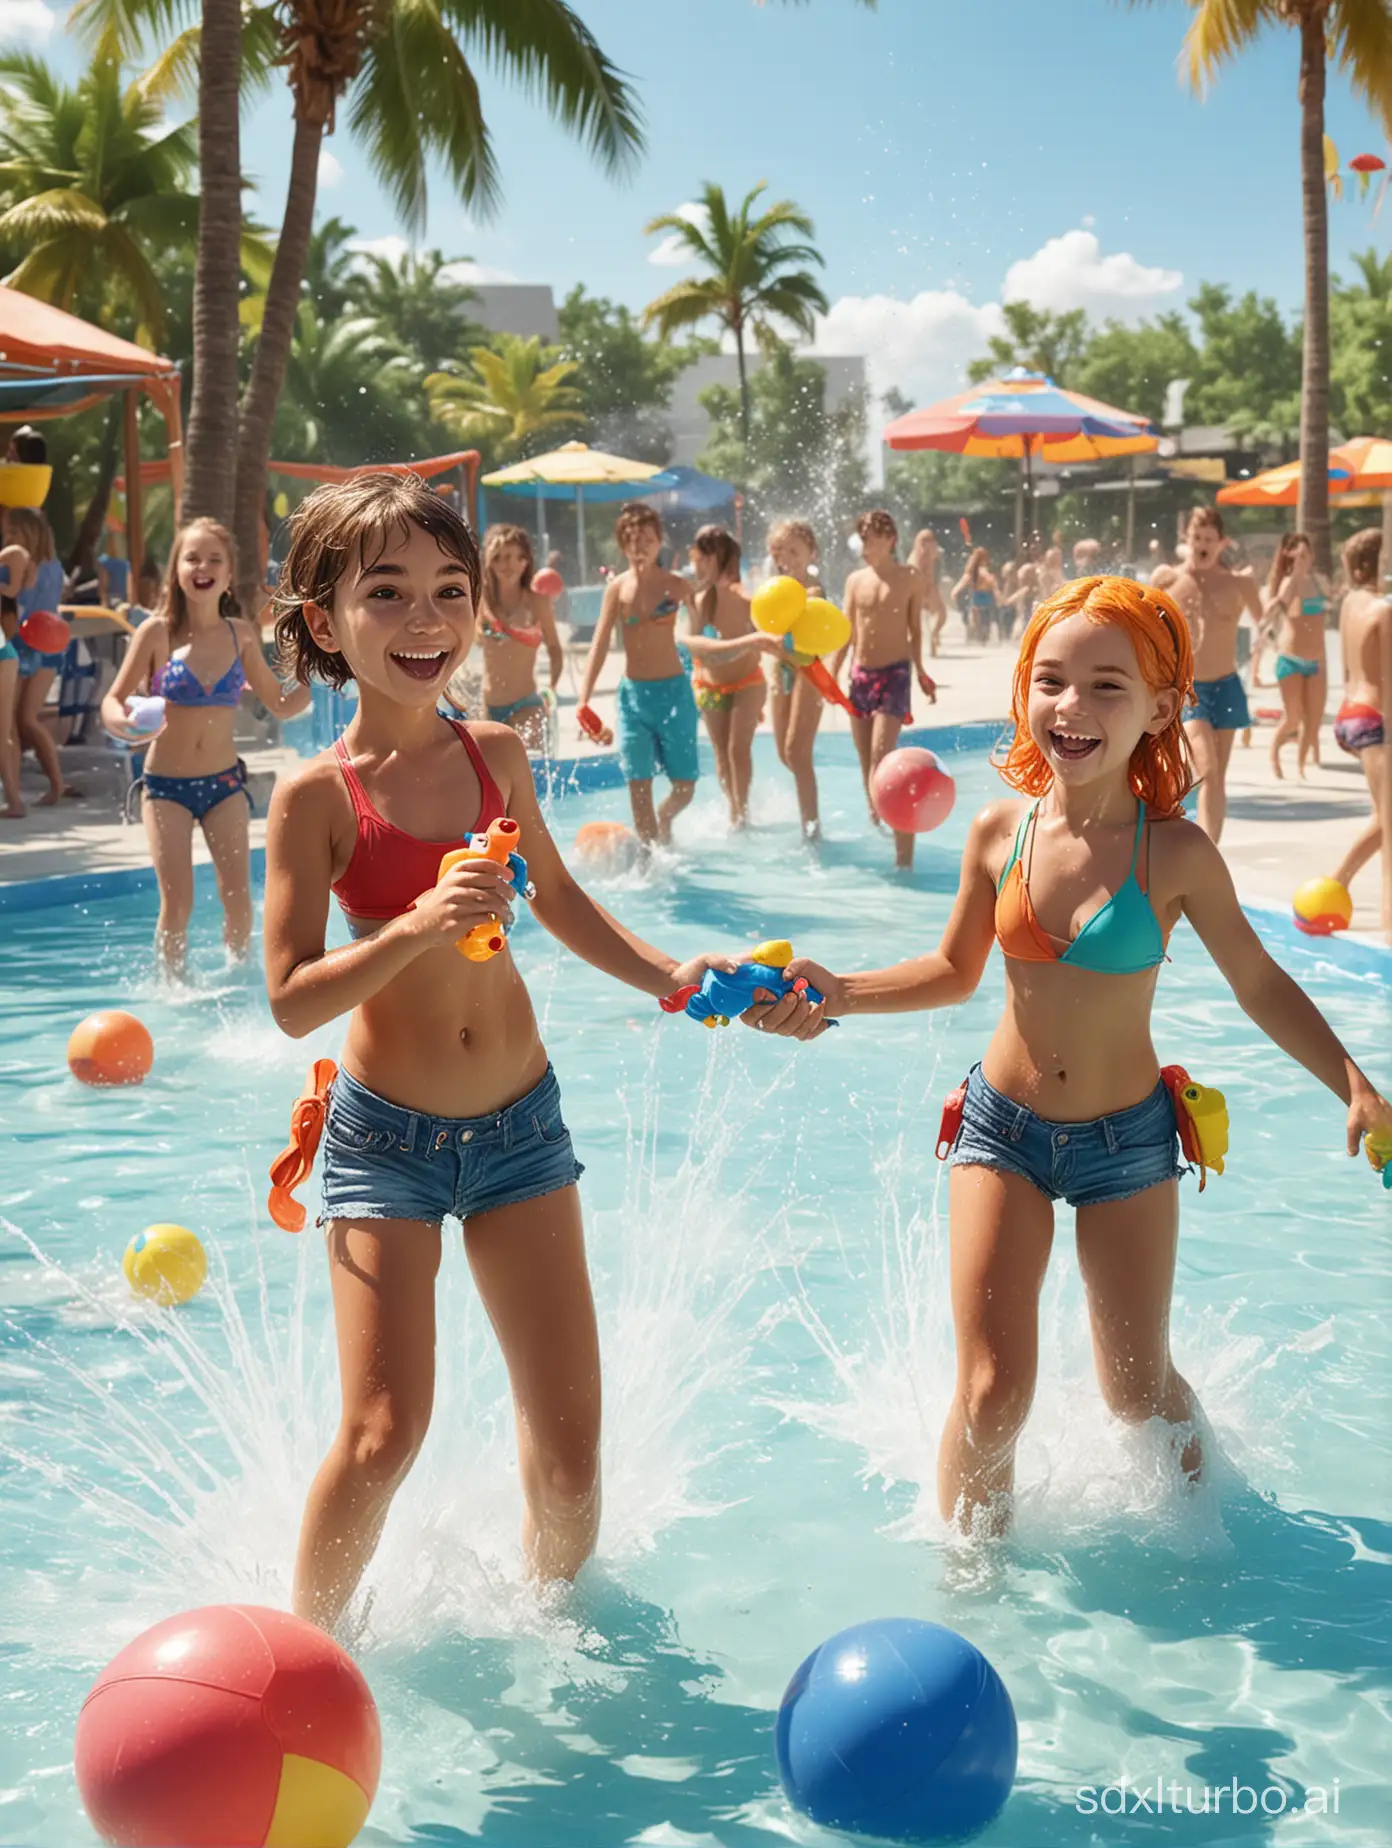 Cartoon boys and girls playing in the water park, having a water fight together with water guns and beach balls.